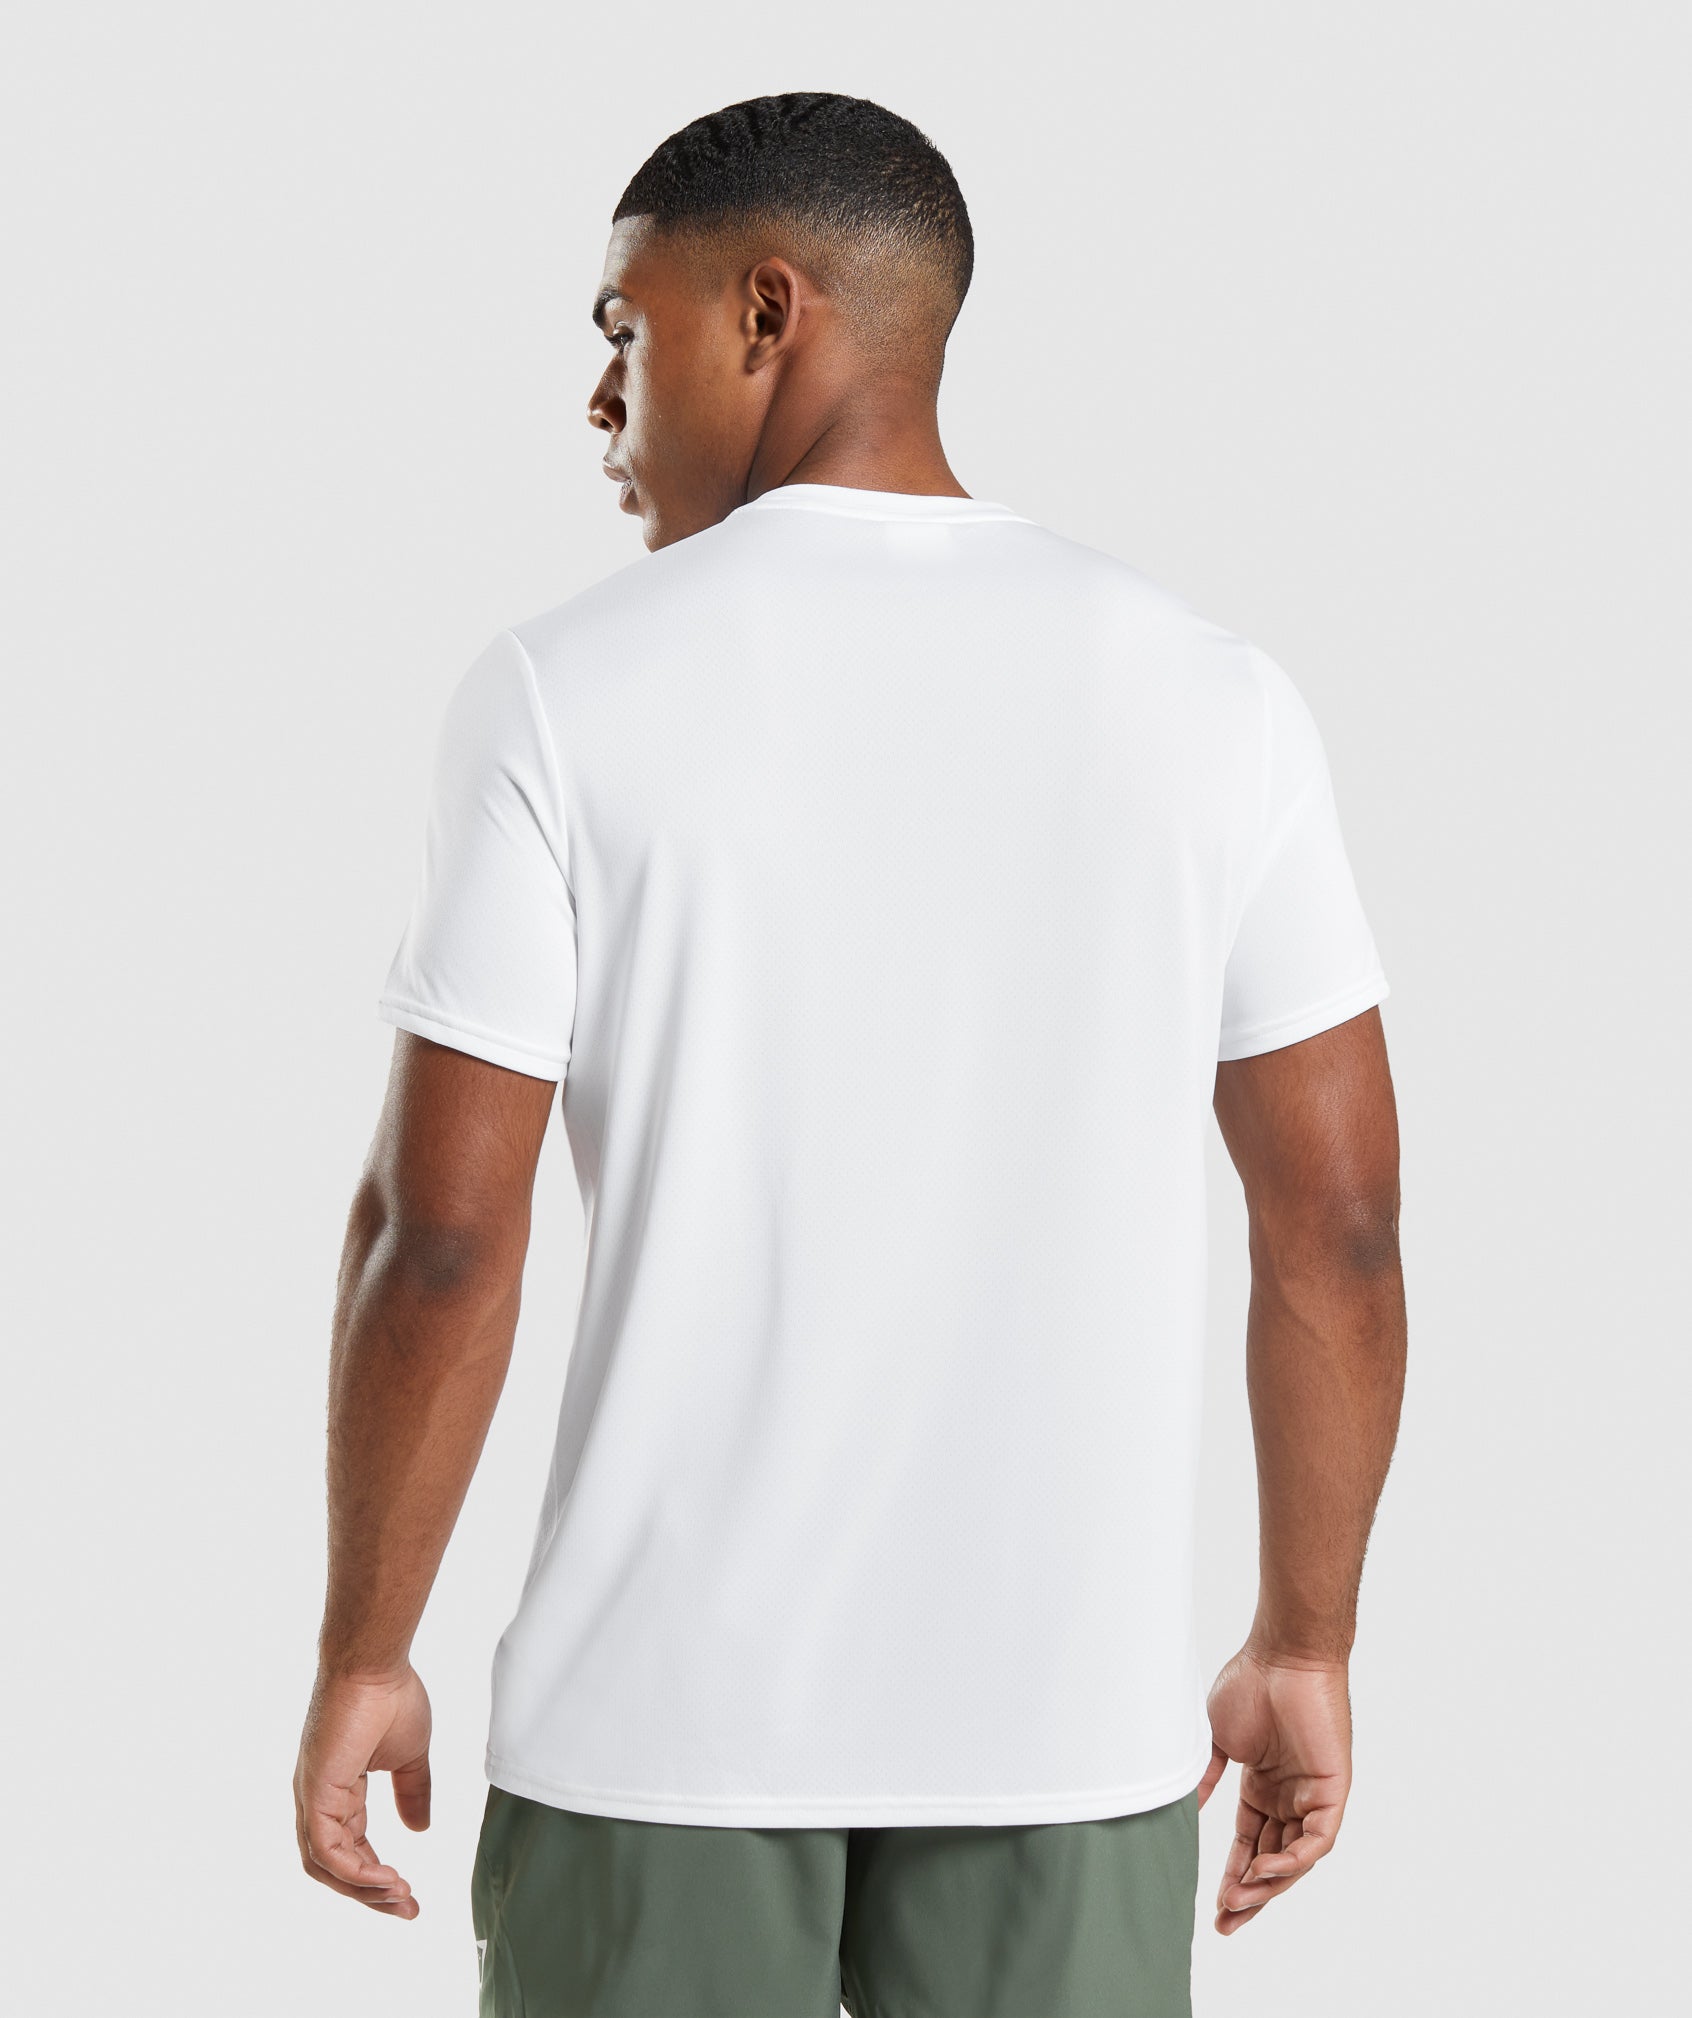 Arrival Regular Fit T-Shirt in White